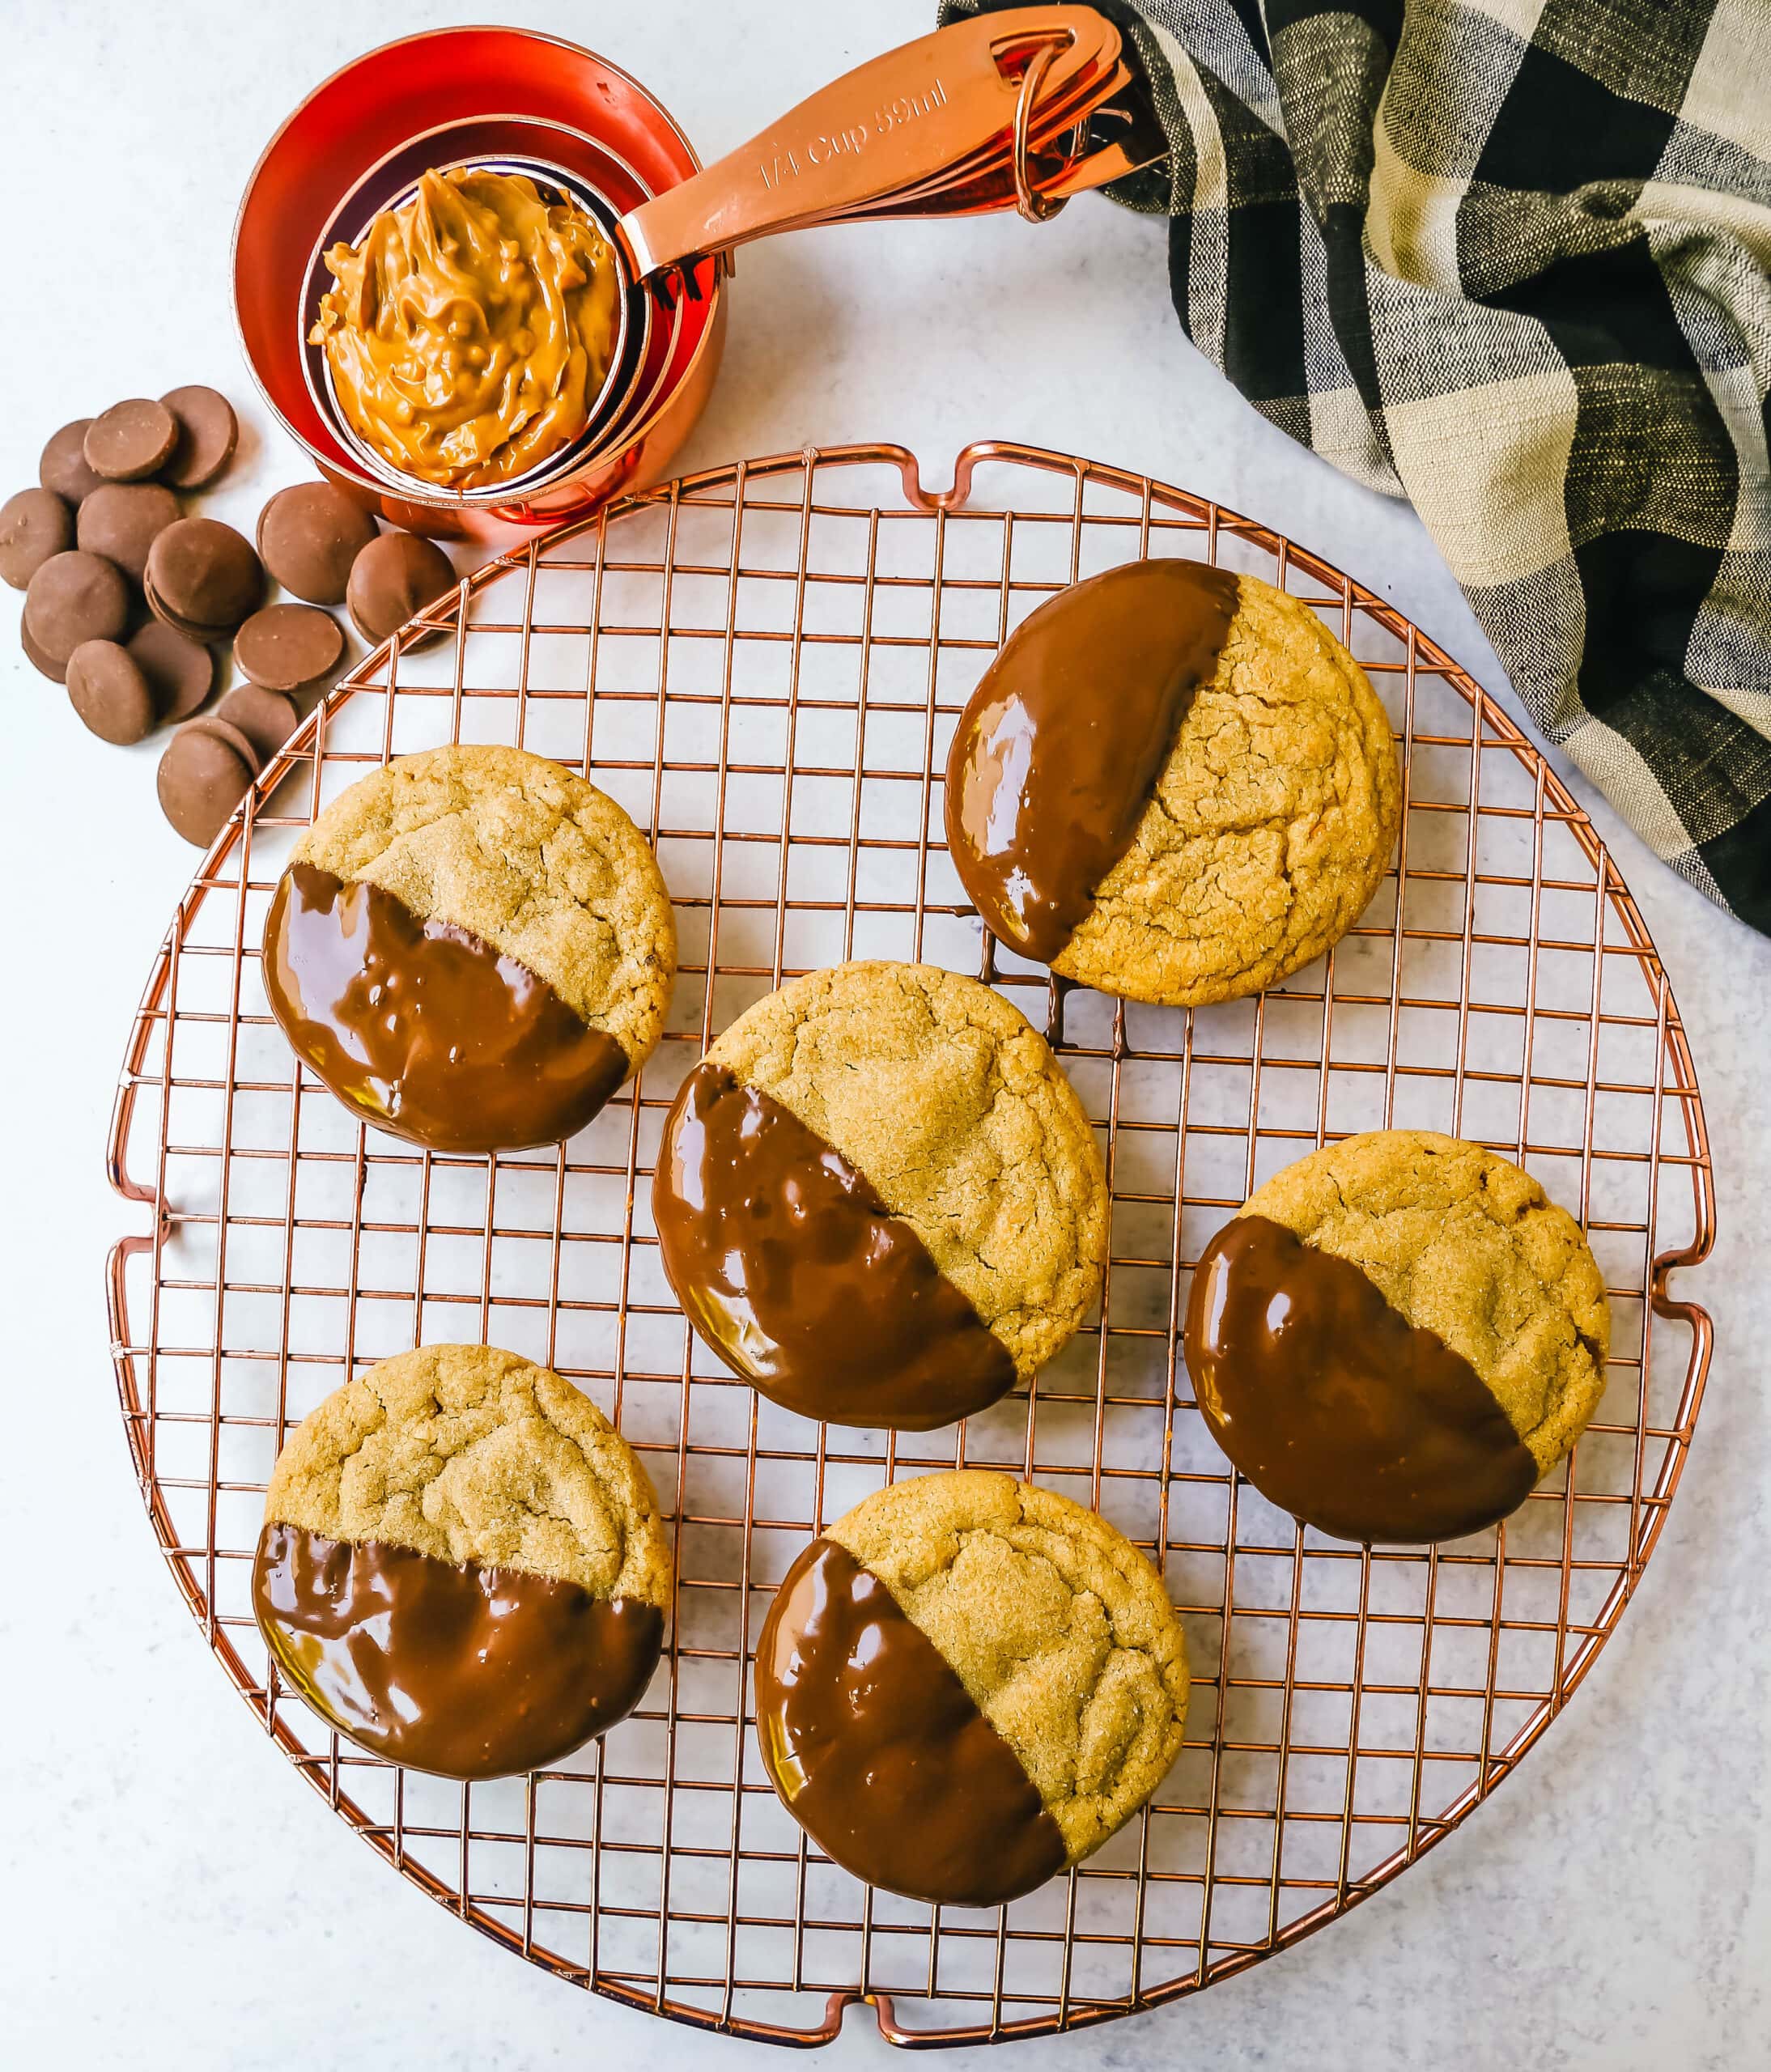 Soft, chewy homemade peanut butter cookies dipped in melted chocolate. This peanut butter and chocolate cookie is rich and decadent and perfect for chocolate peanut butter lovers!